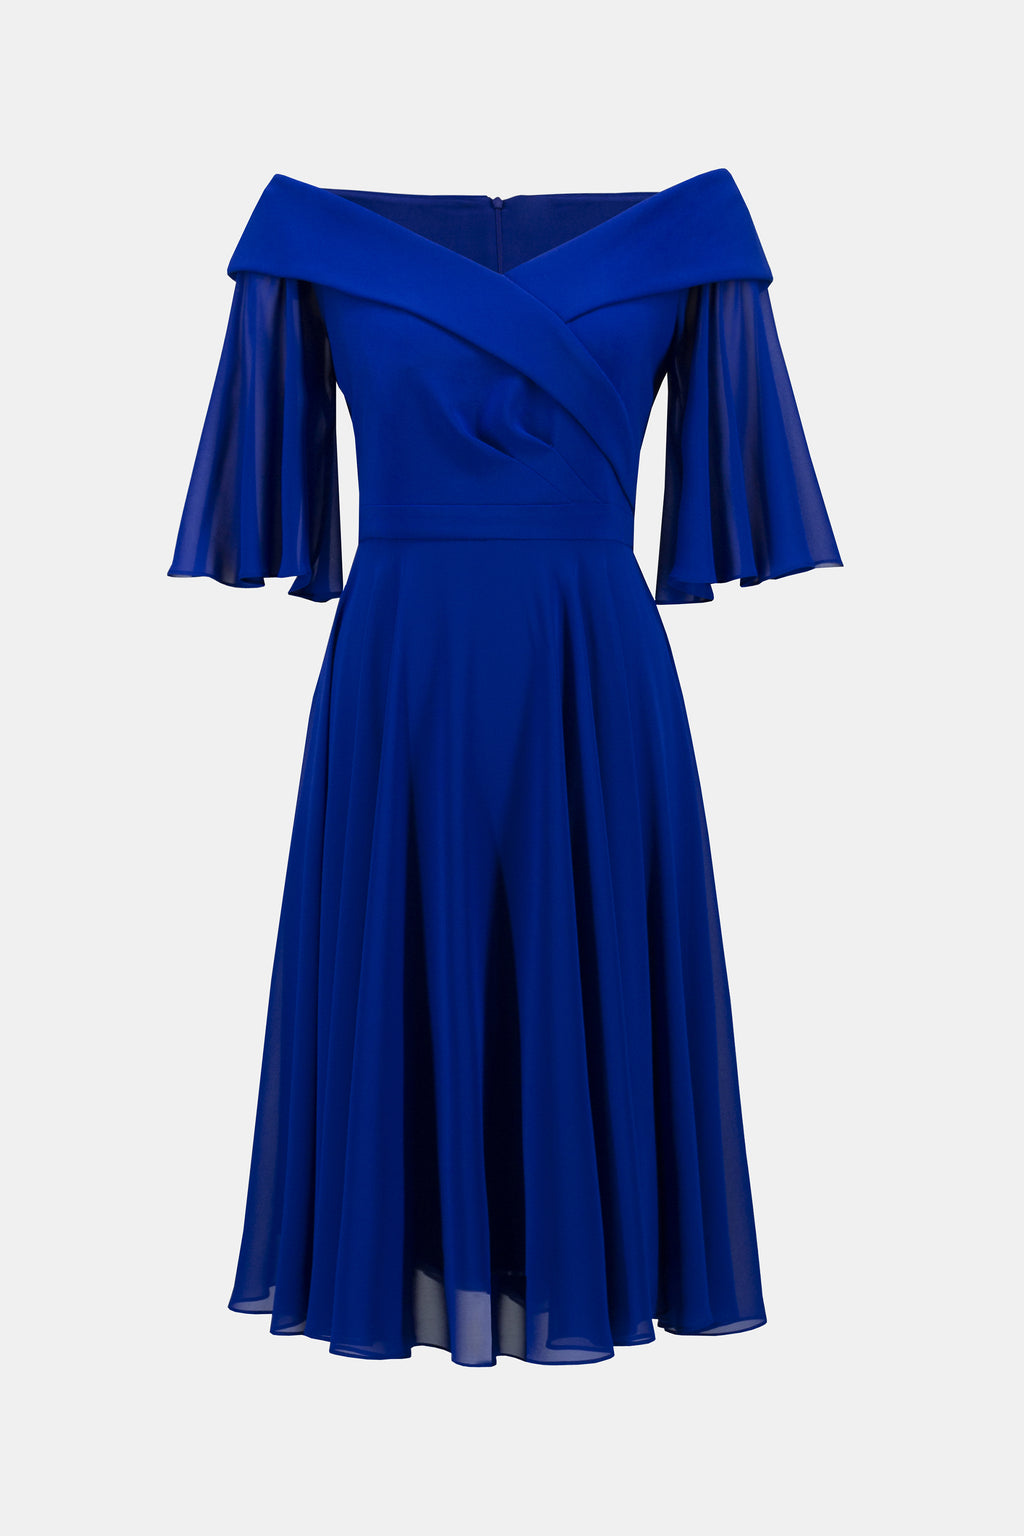 You'll feel like the belle of the ball in this romantic off-the-shoulder dress that features feminine chiffon bell sleeves, a shawl collar that gently hugs your shoulders, and a flattering wrap neckline. You'll feel lovely walking across the room as the flowy ankle-length skirt sways with your every 